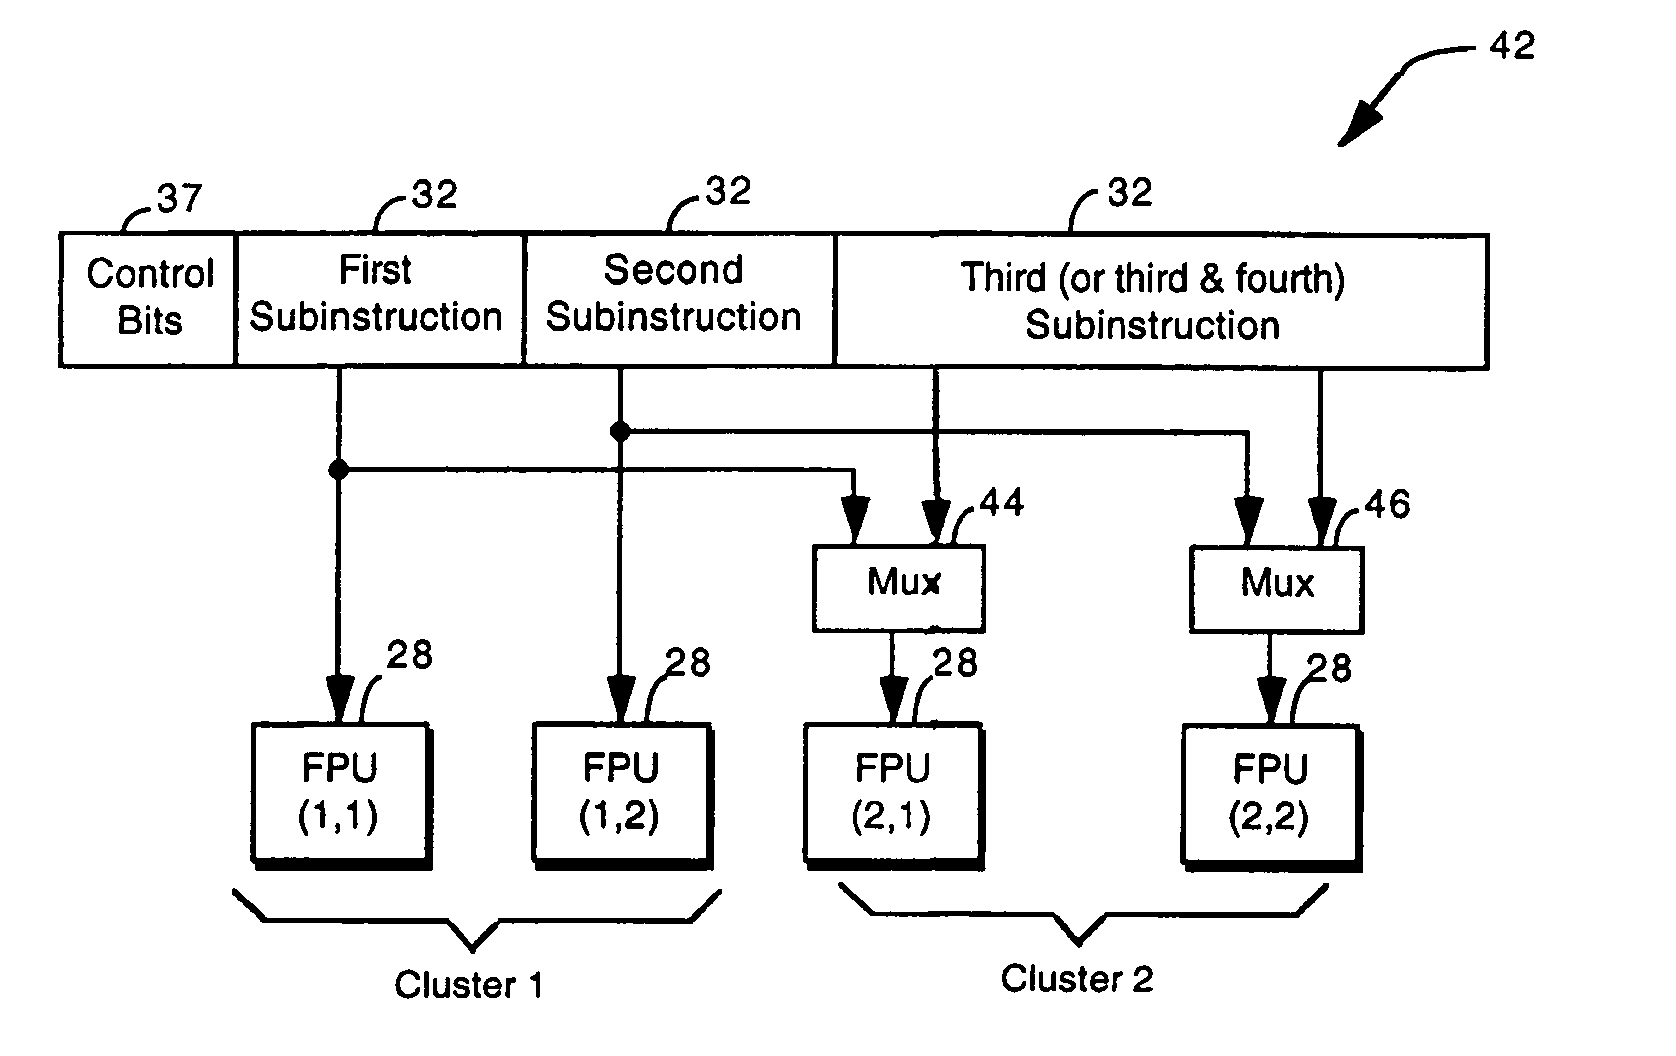 Method and apparatus for compressing VLIW instruction and sharing subinstructions